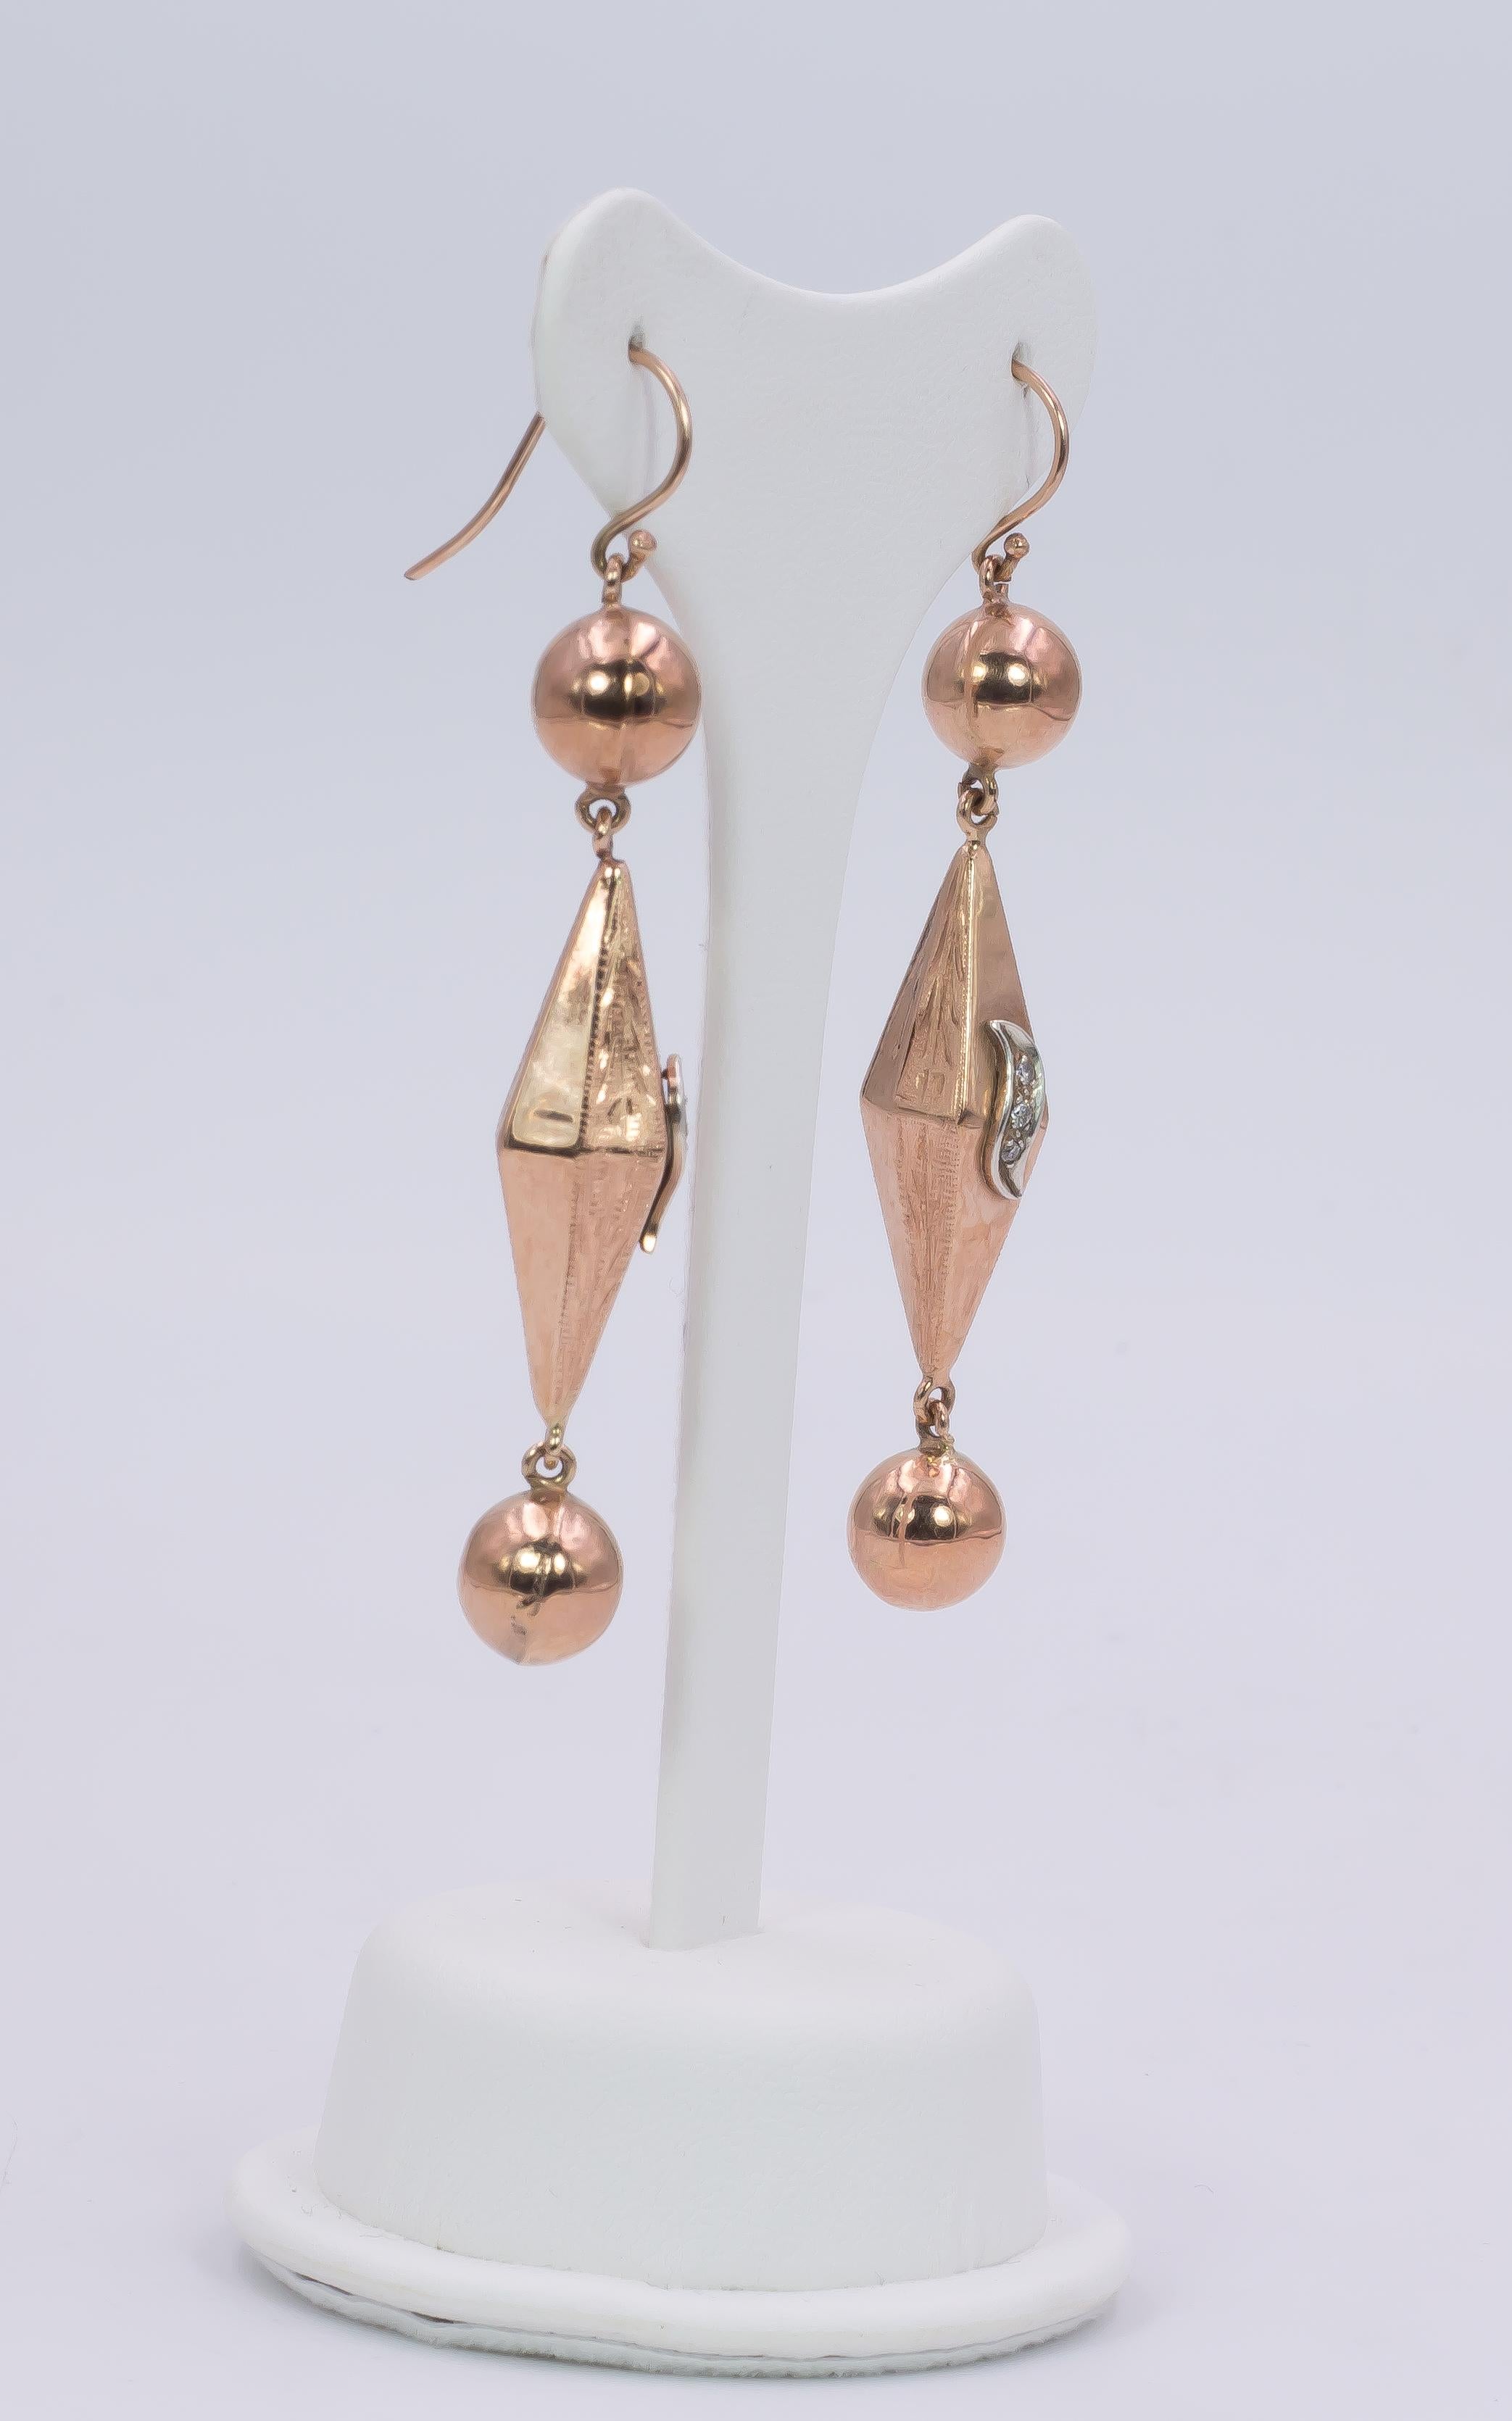 An exquisite pair of antique pendant earrings, crafted in 14K rose gold; each one is set with an upper and a lower sphere, linked to a central pyramidal section, decorated with diamonds. 
The earrings are antique and date from the